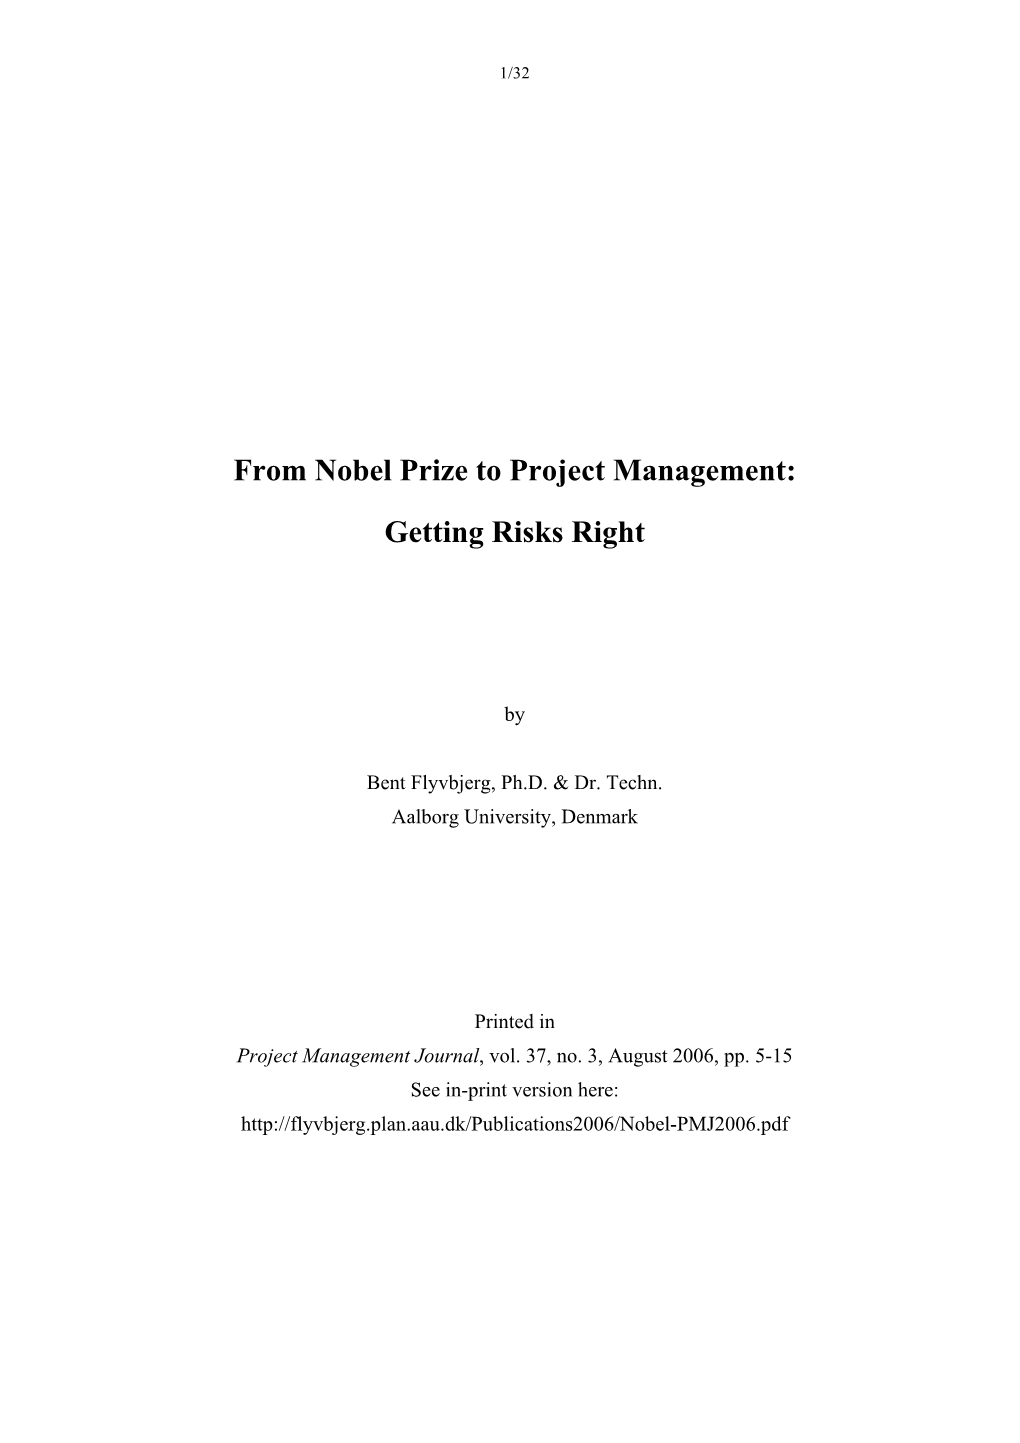 From Nobel Prize to Project Management: Getting Risks Right